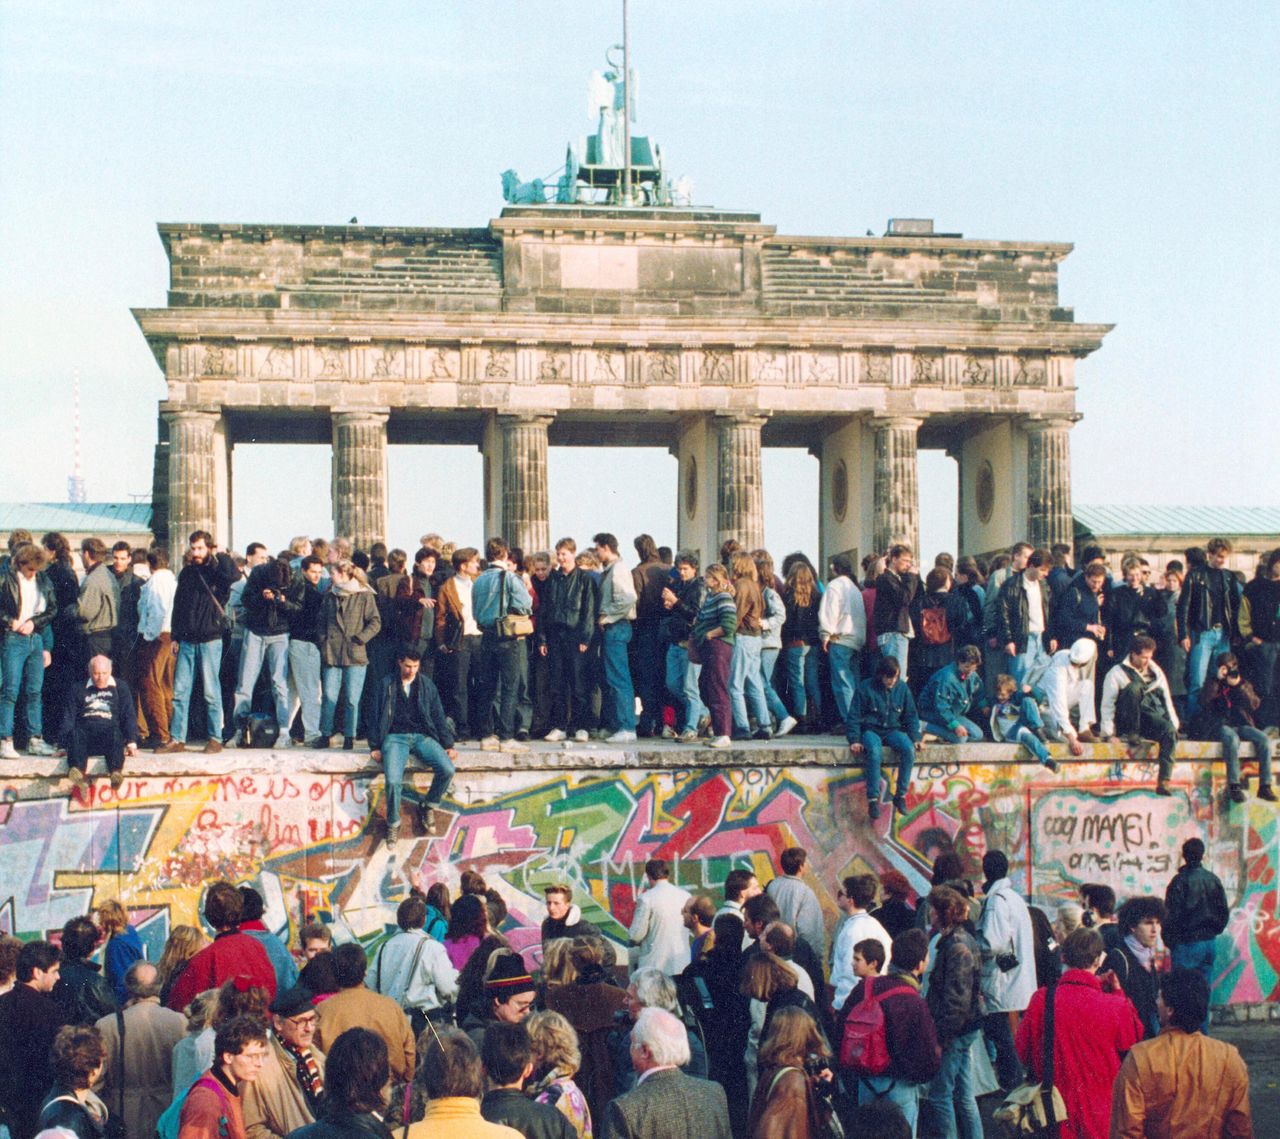 Germans from East and West stand on the Berlin Wall in front of the Brandenburg Gate in Berlin, 10 November 1989.